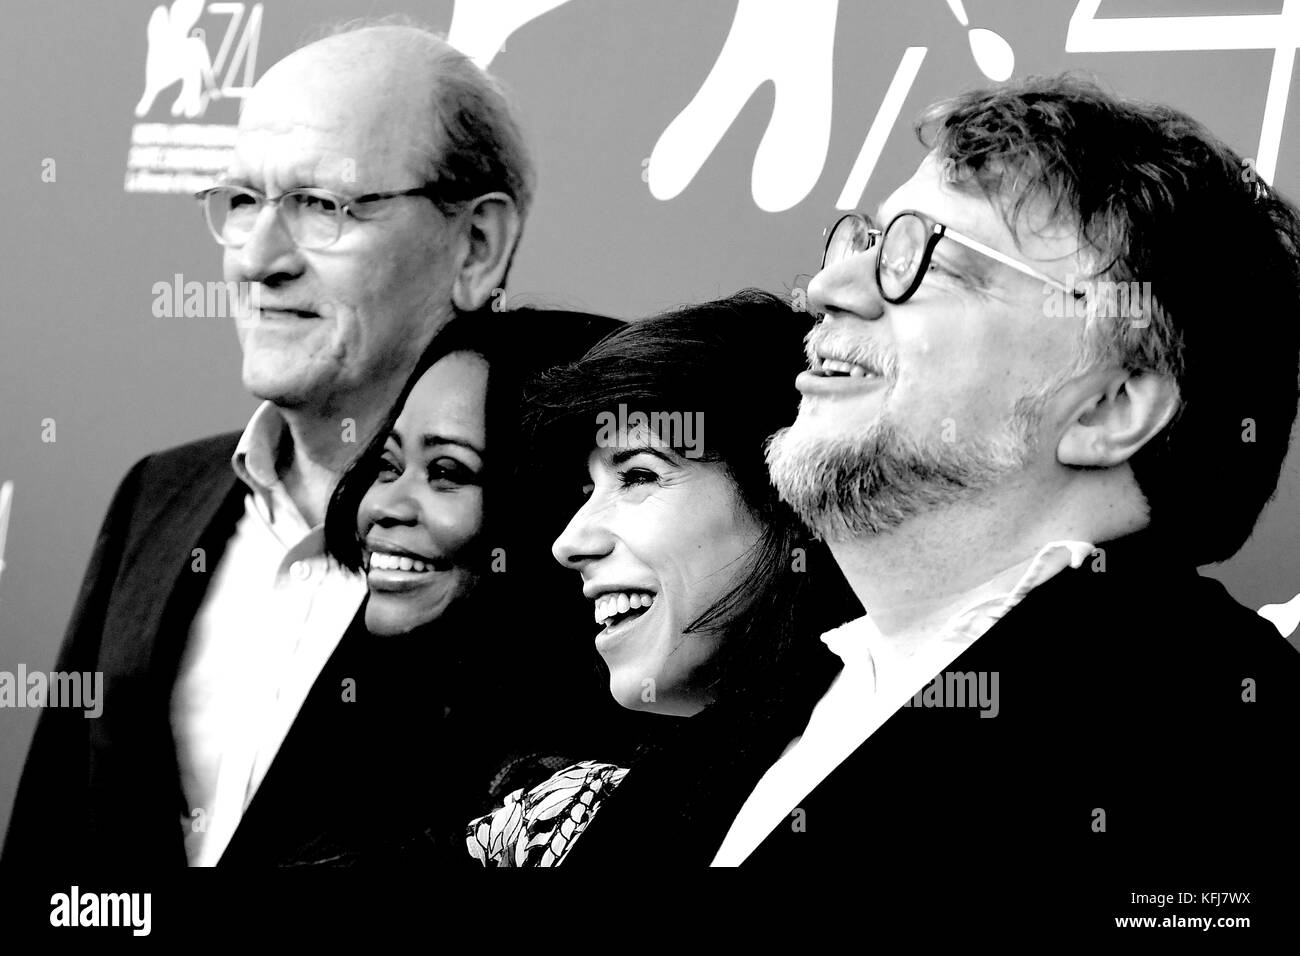 Richard Jenkins, Octavia Spencer, Sally Hawkins and Guillermo del Toro attend a photocall for The Shape Of Water, Venice Film Festival © Paul Treadway Stock Photo